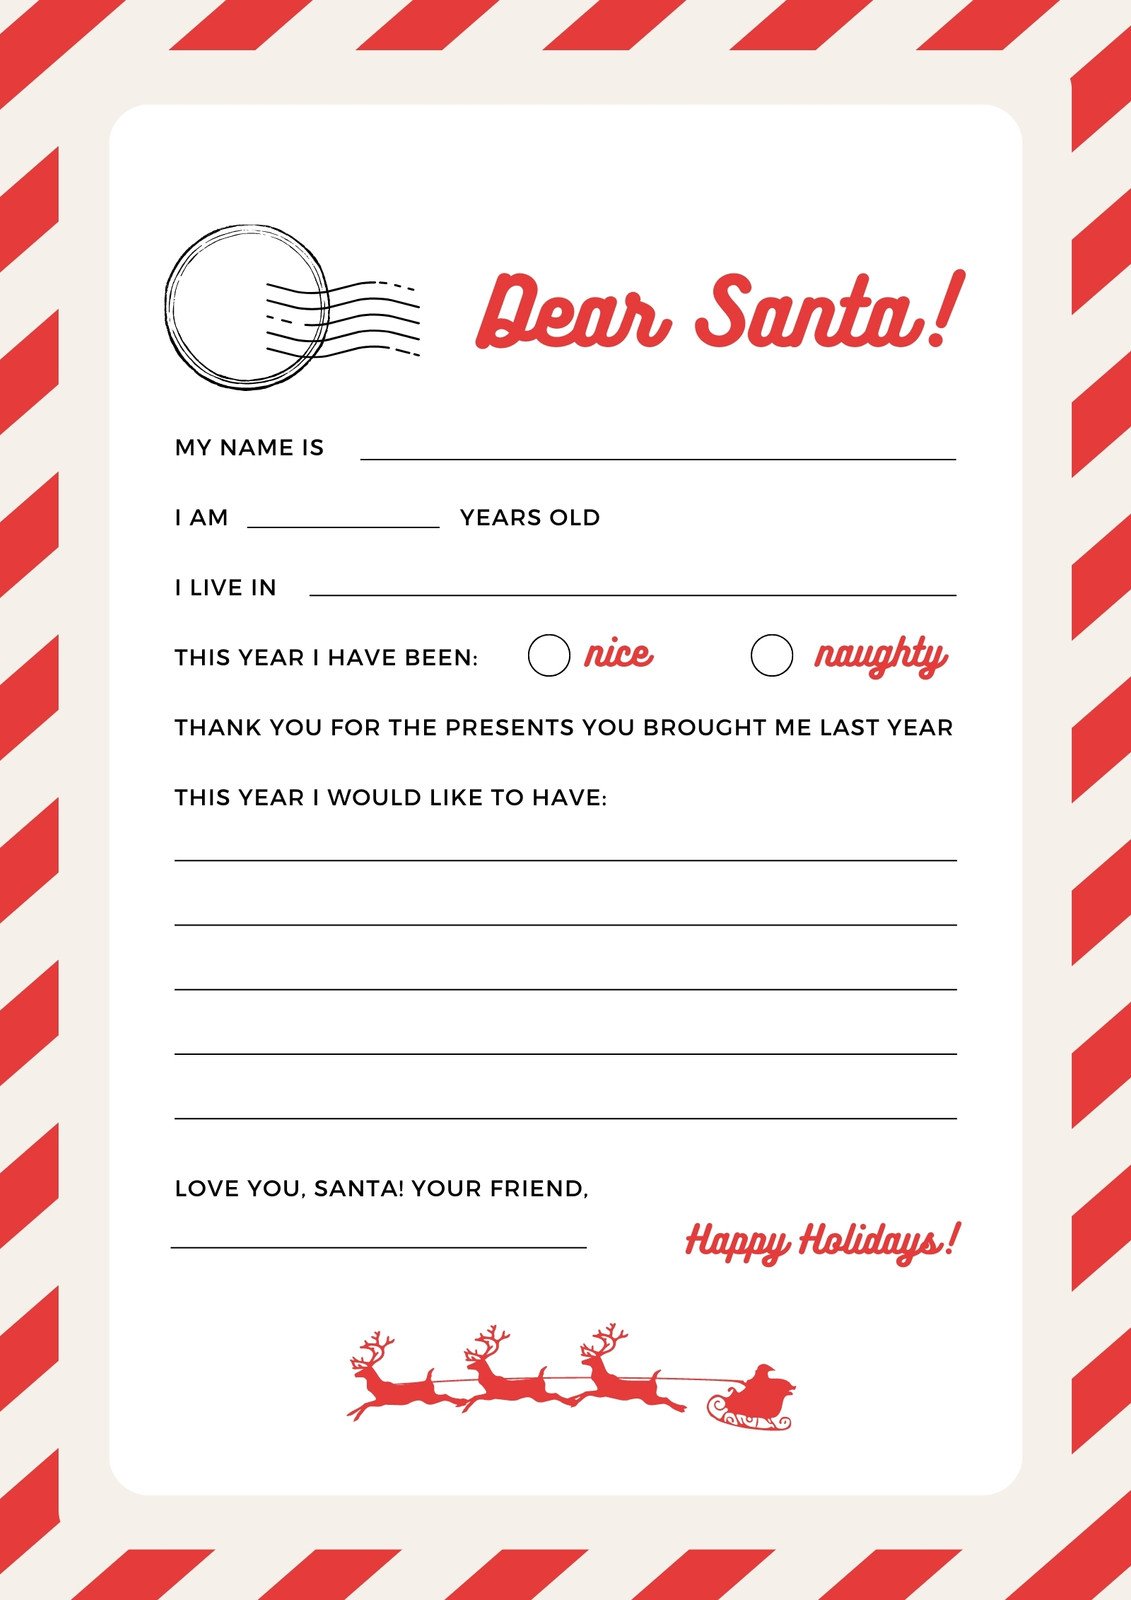 create-a-fun-and-festive-secret-santa-wish-list-for-coworkers-with-our